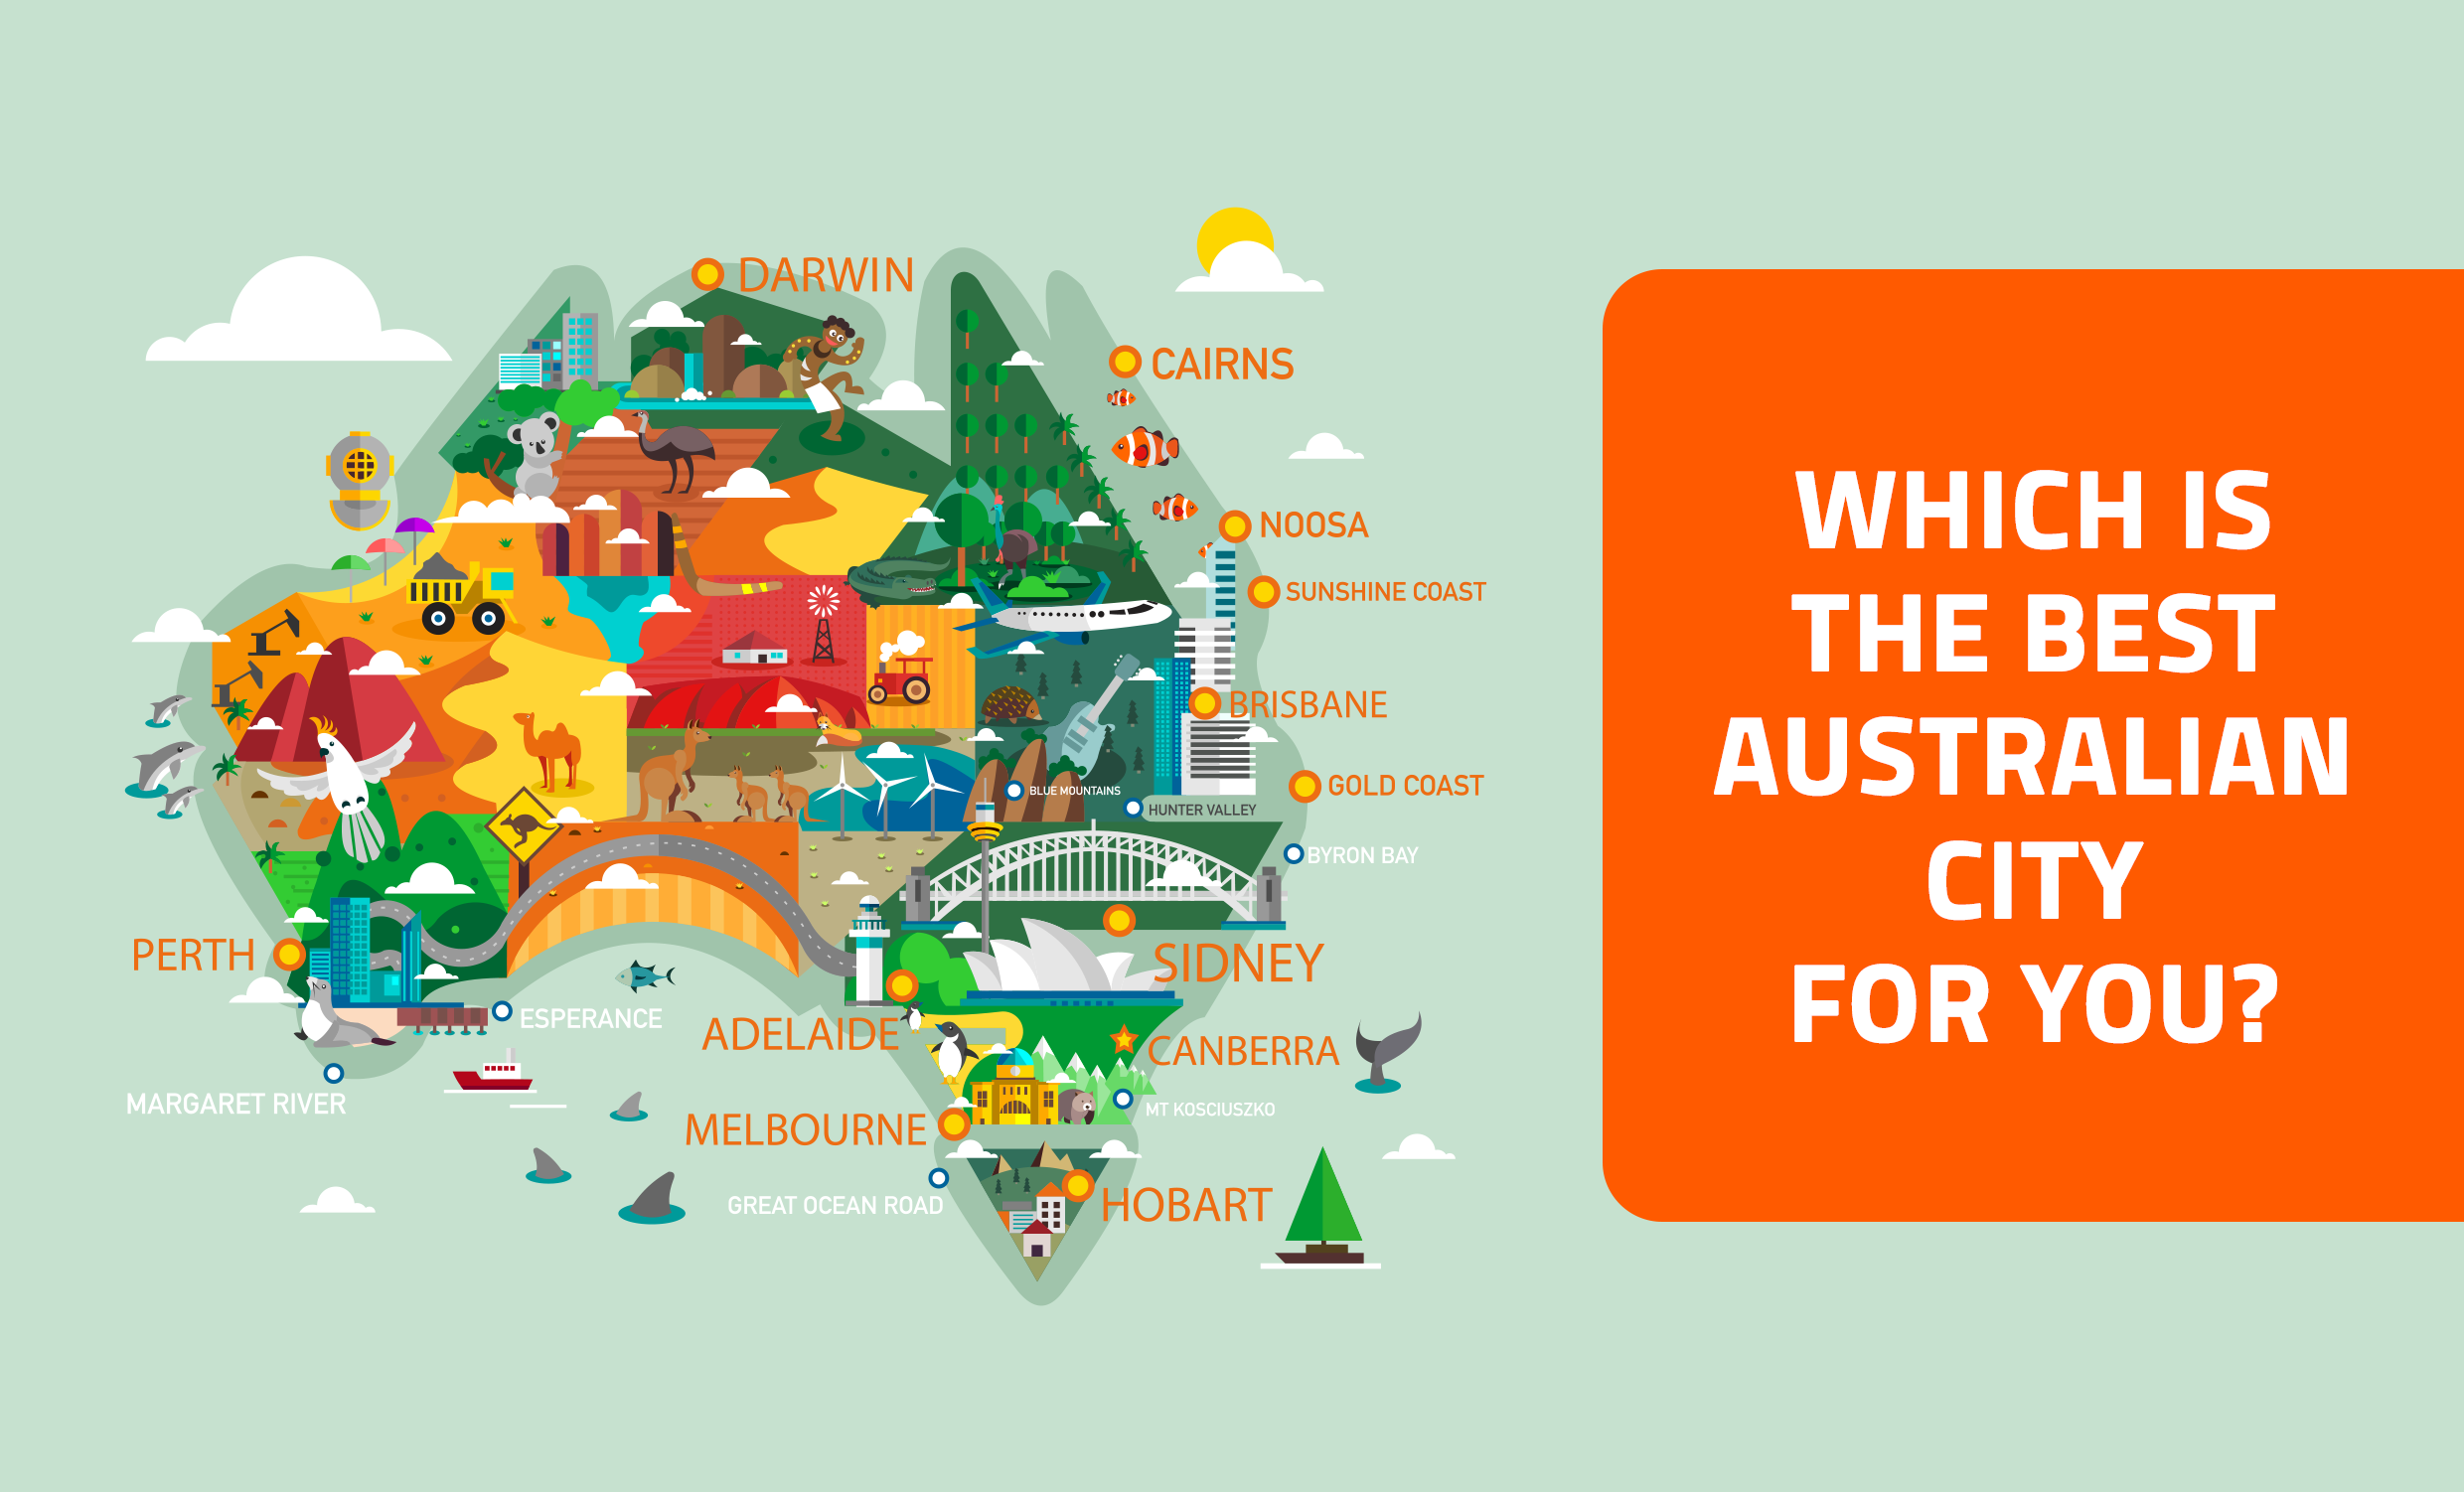 Which is the best Australian city for you?